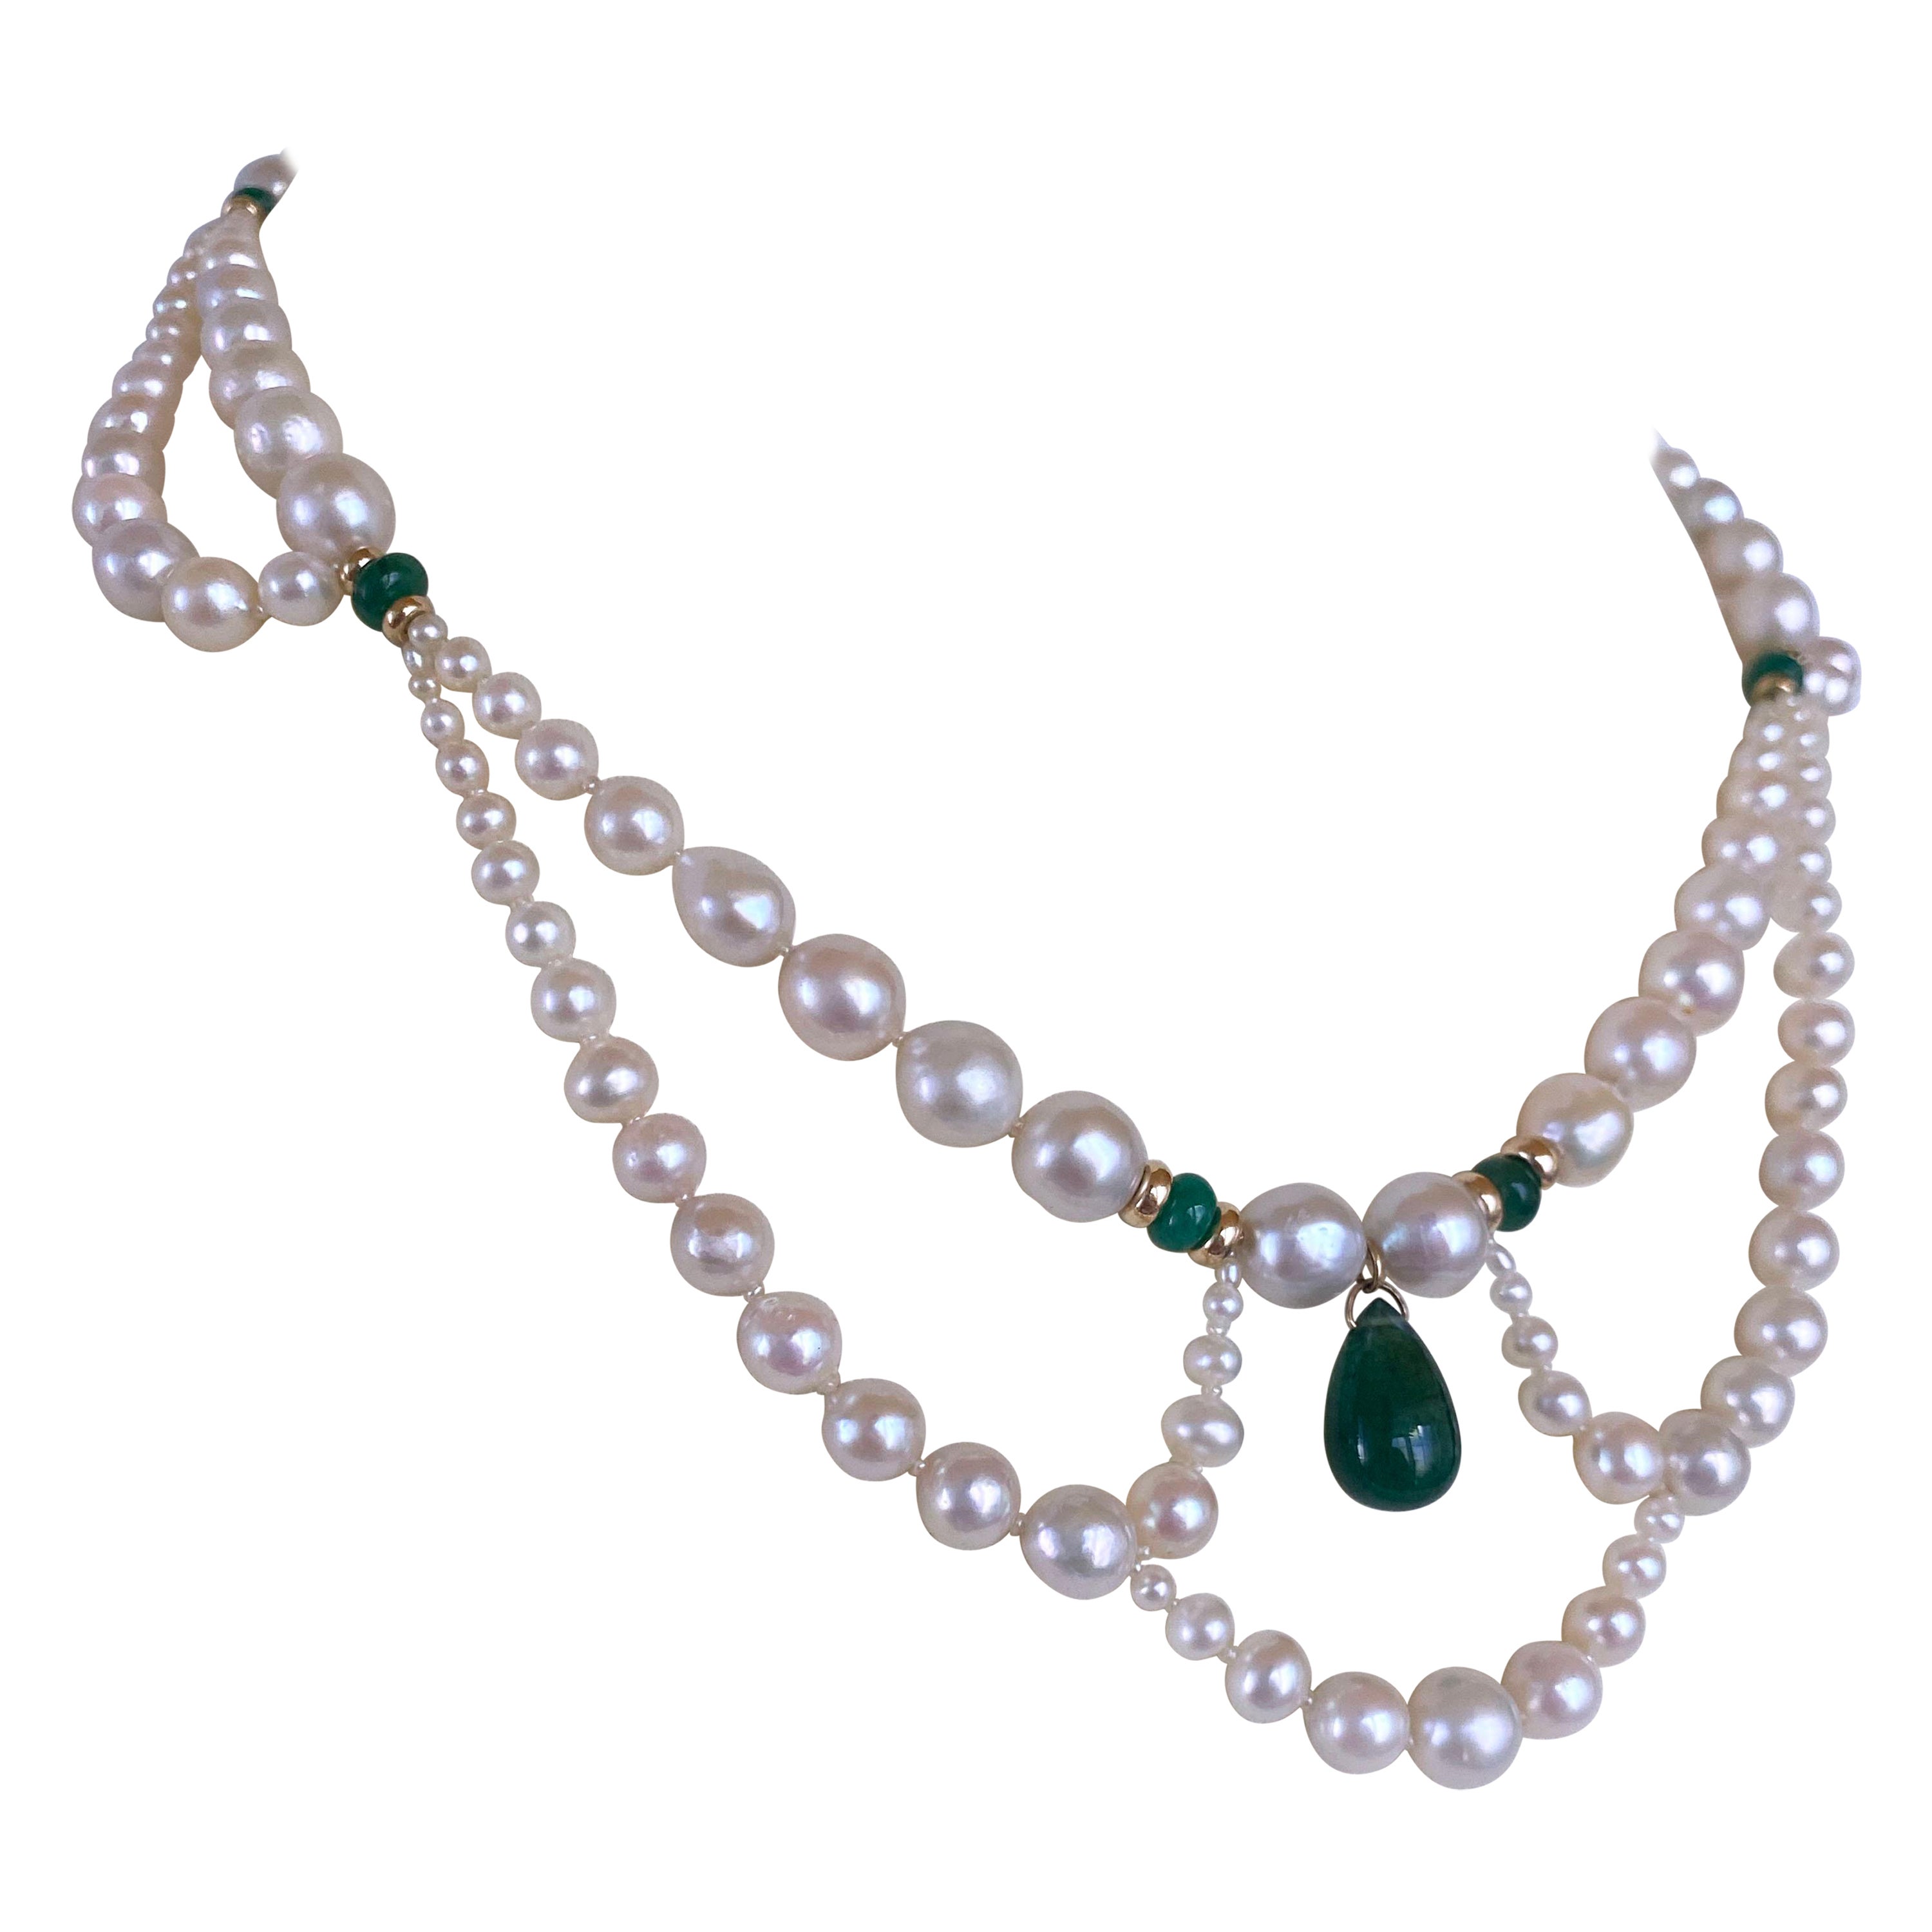 Marina J. Graduated & Draped Pearl, Emerald Necklace with 14K Yellow Gold